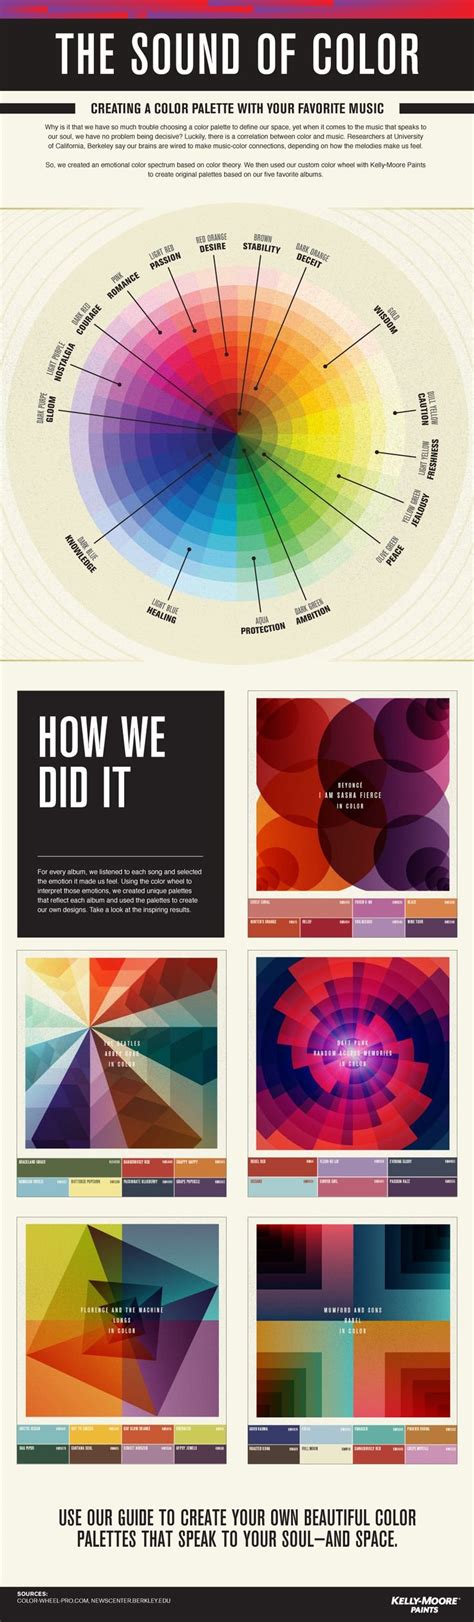 9 Awesome Infographic Design Examples Plus Tips To Create Your Own